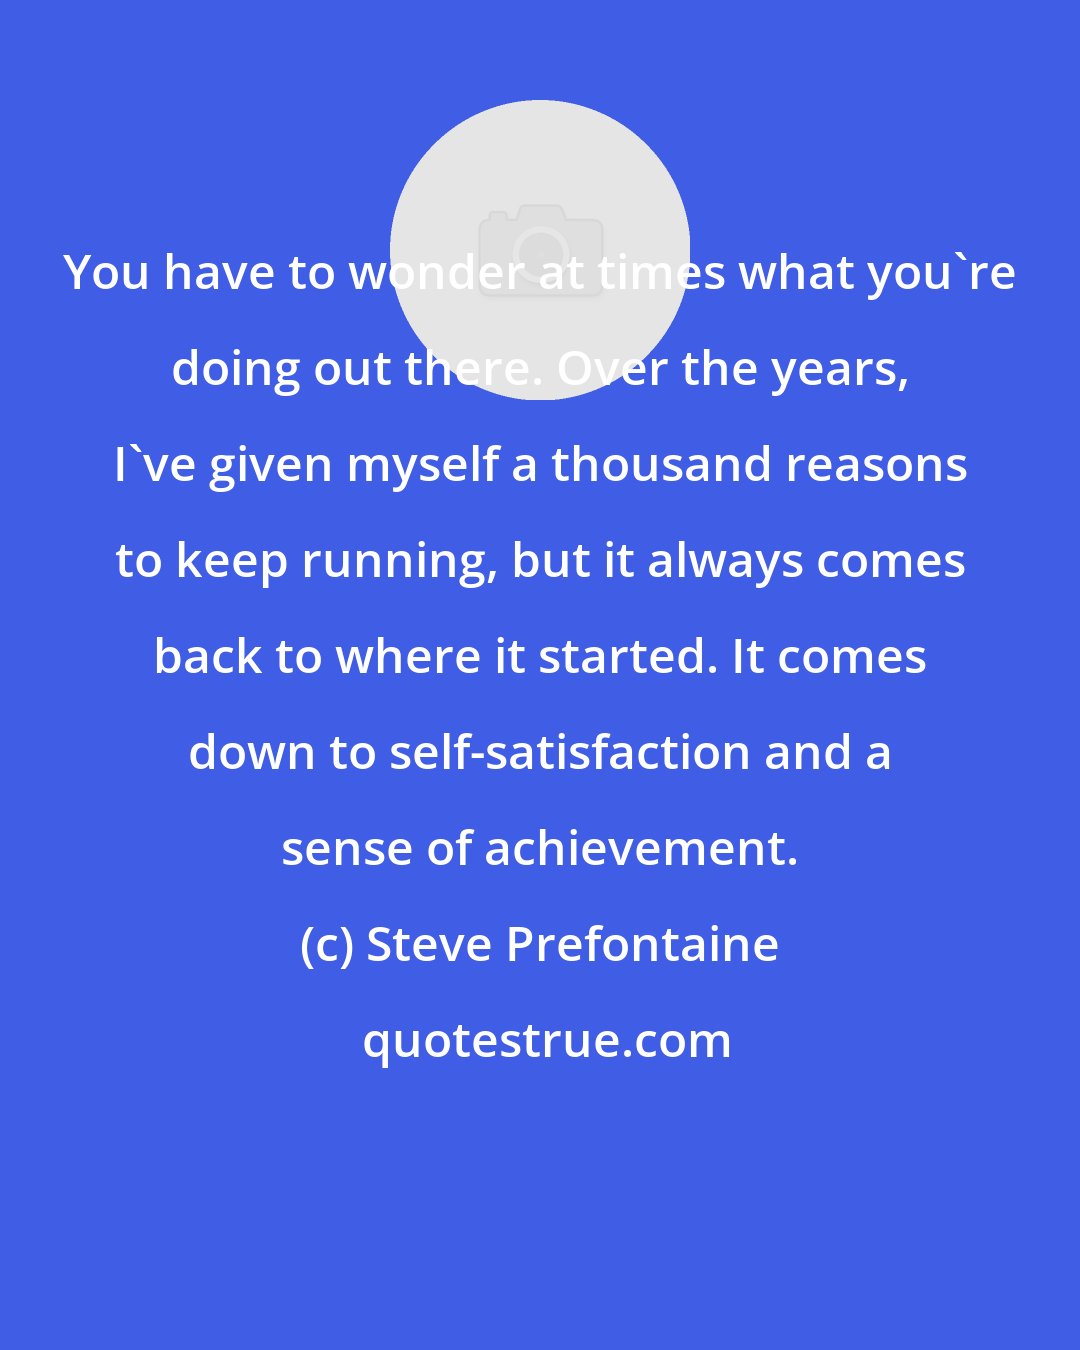 Steve Prefontaine: You have to wonder at times what you're doing out there. Over the years, I've given myself a thousand reasons to keep running, but it always comes back to where it started. It comes down to self-satisfaction and a sense of achievement.